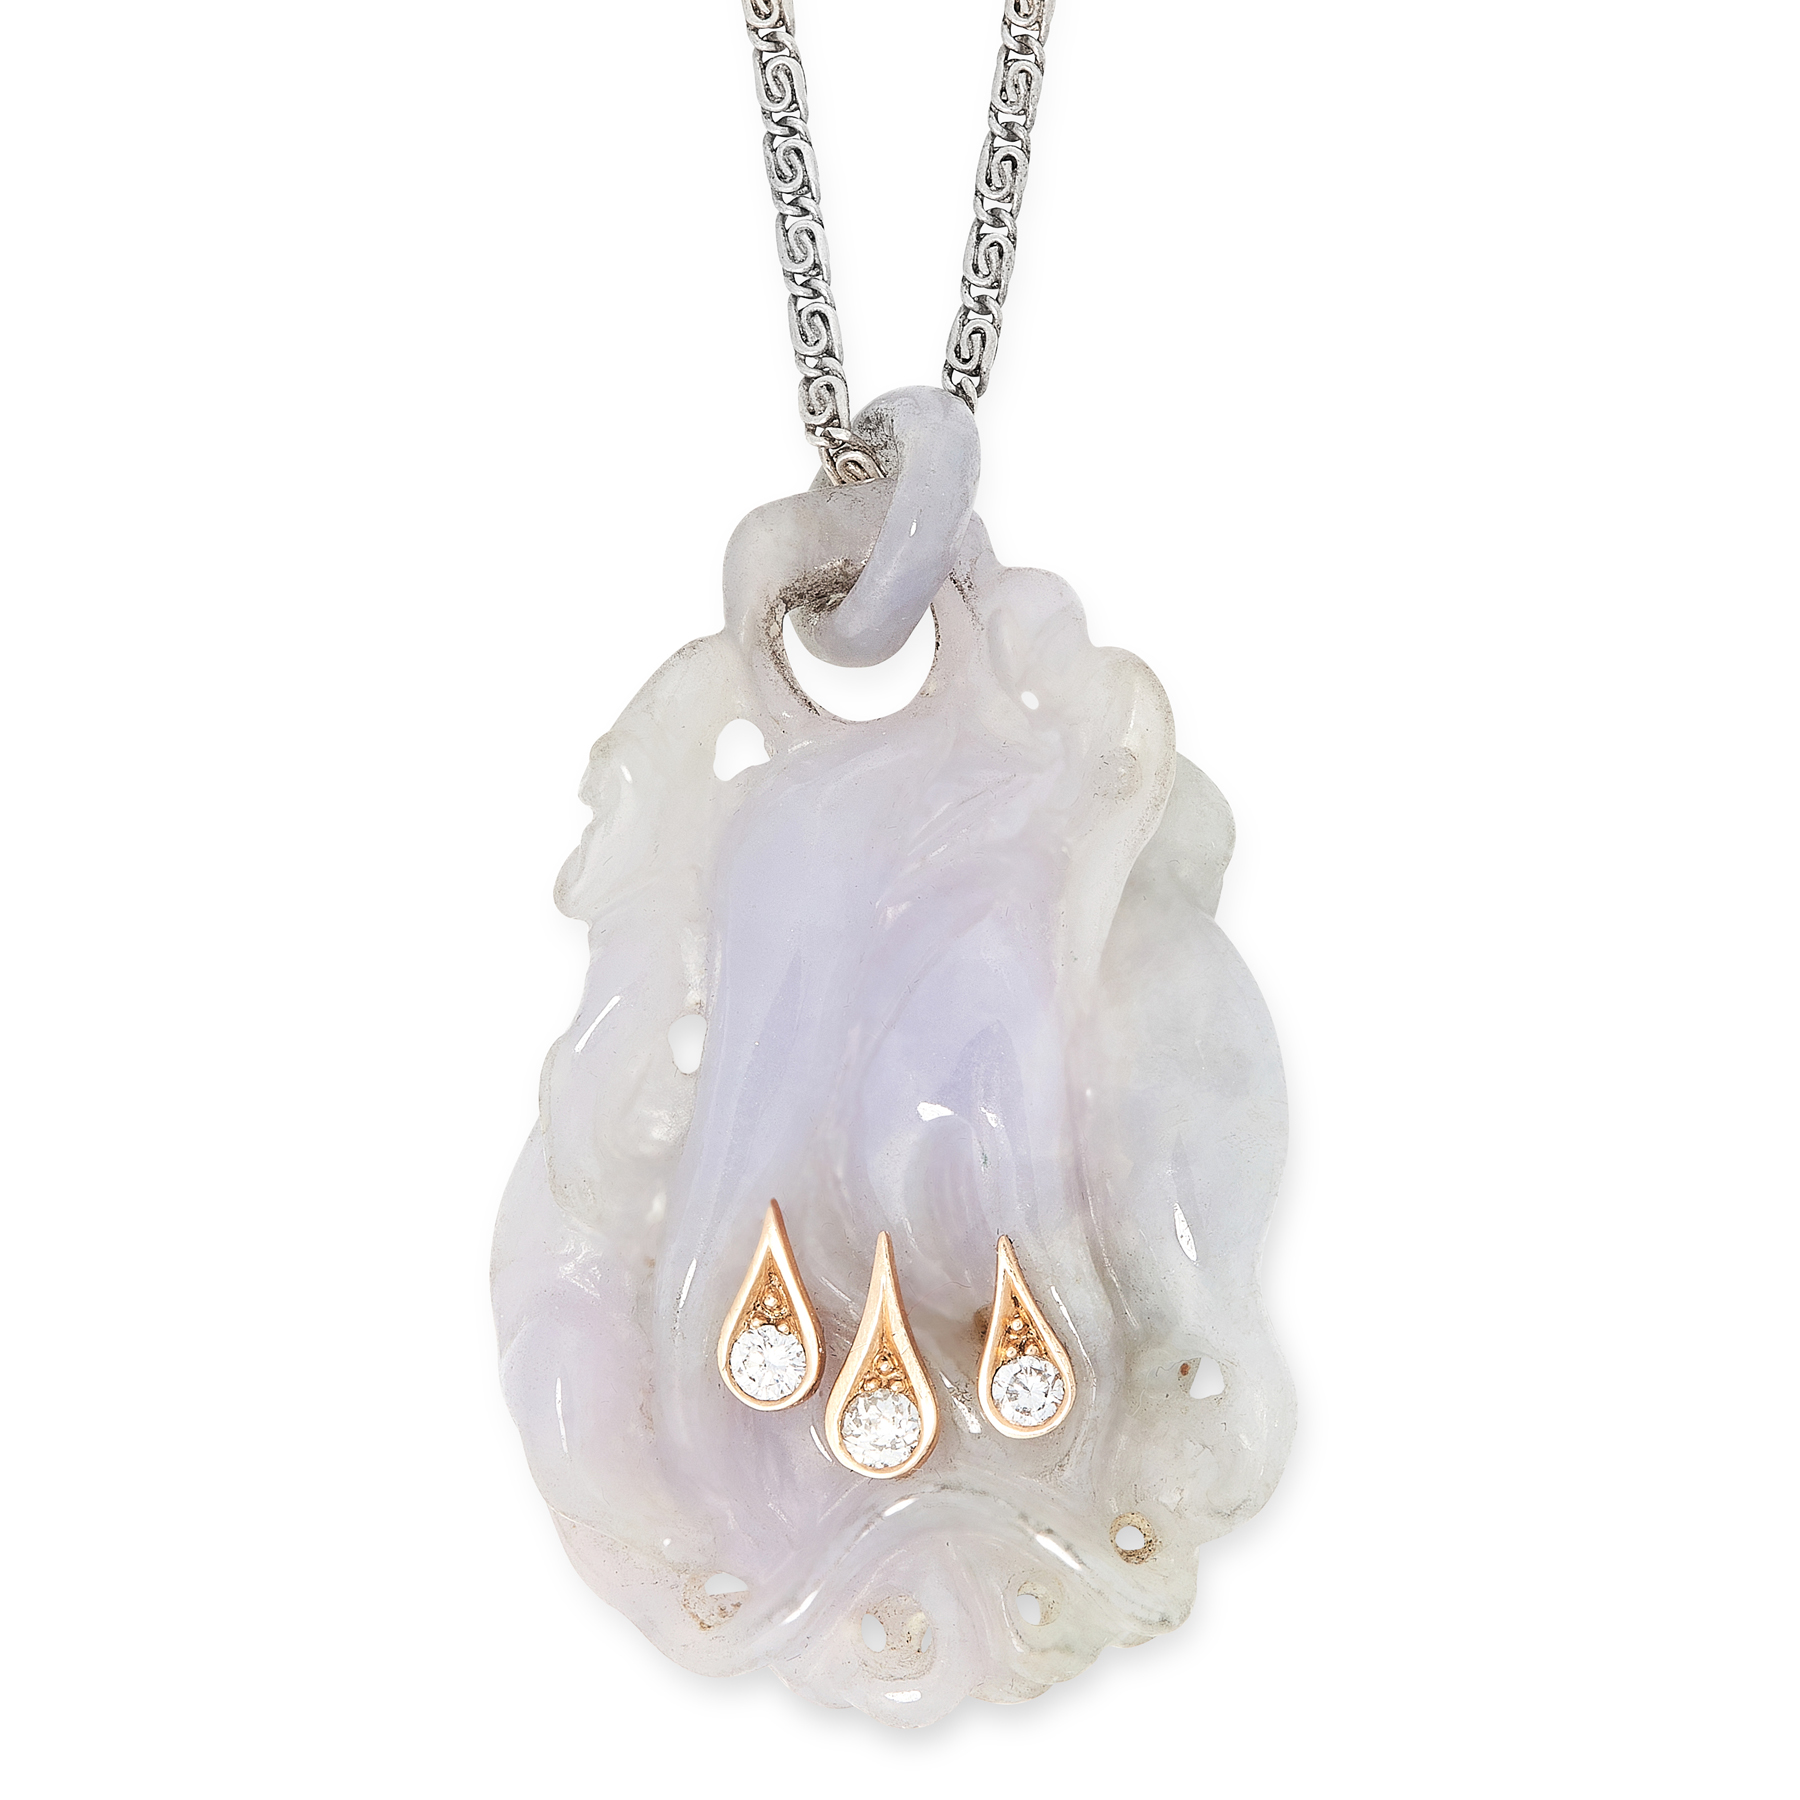 A LAVENDER JADE AND DIAMOND PENDANT AND CHAIN formed of a carved piece of lavender jade depicting